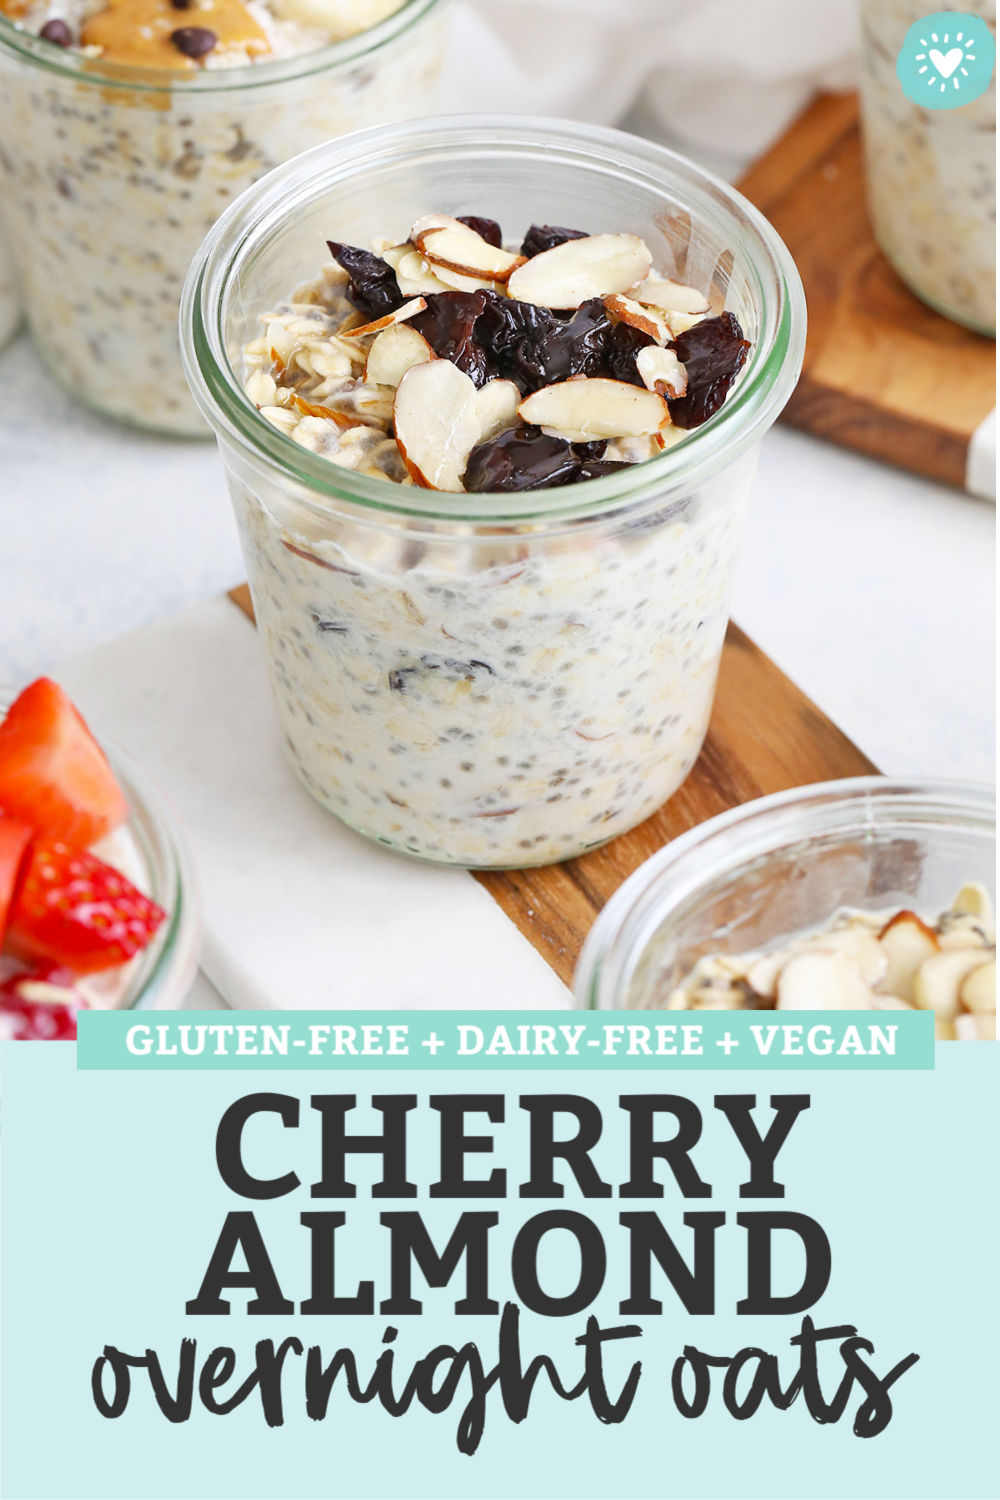 Cherry Almond Overnight Oats - Creamy overnight oats loaded with tangy cherries and crunchy almonds. This yummy overnight oats recipe is one of our favorites! (Gluten-free, vegan) // Meal Prep Breakfast // Cherry Overnight Oats // Healthy Breakfast // Cherry Overnight oatmeal